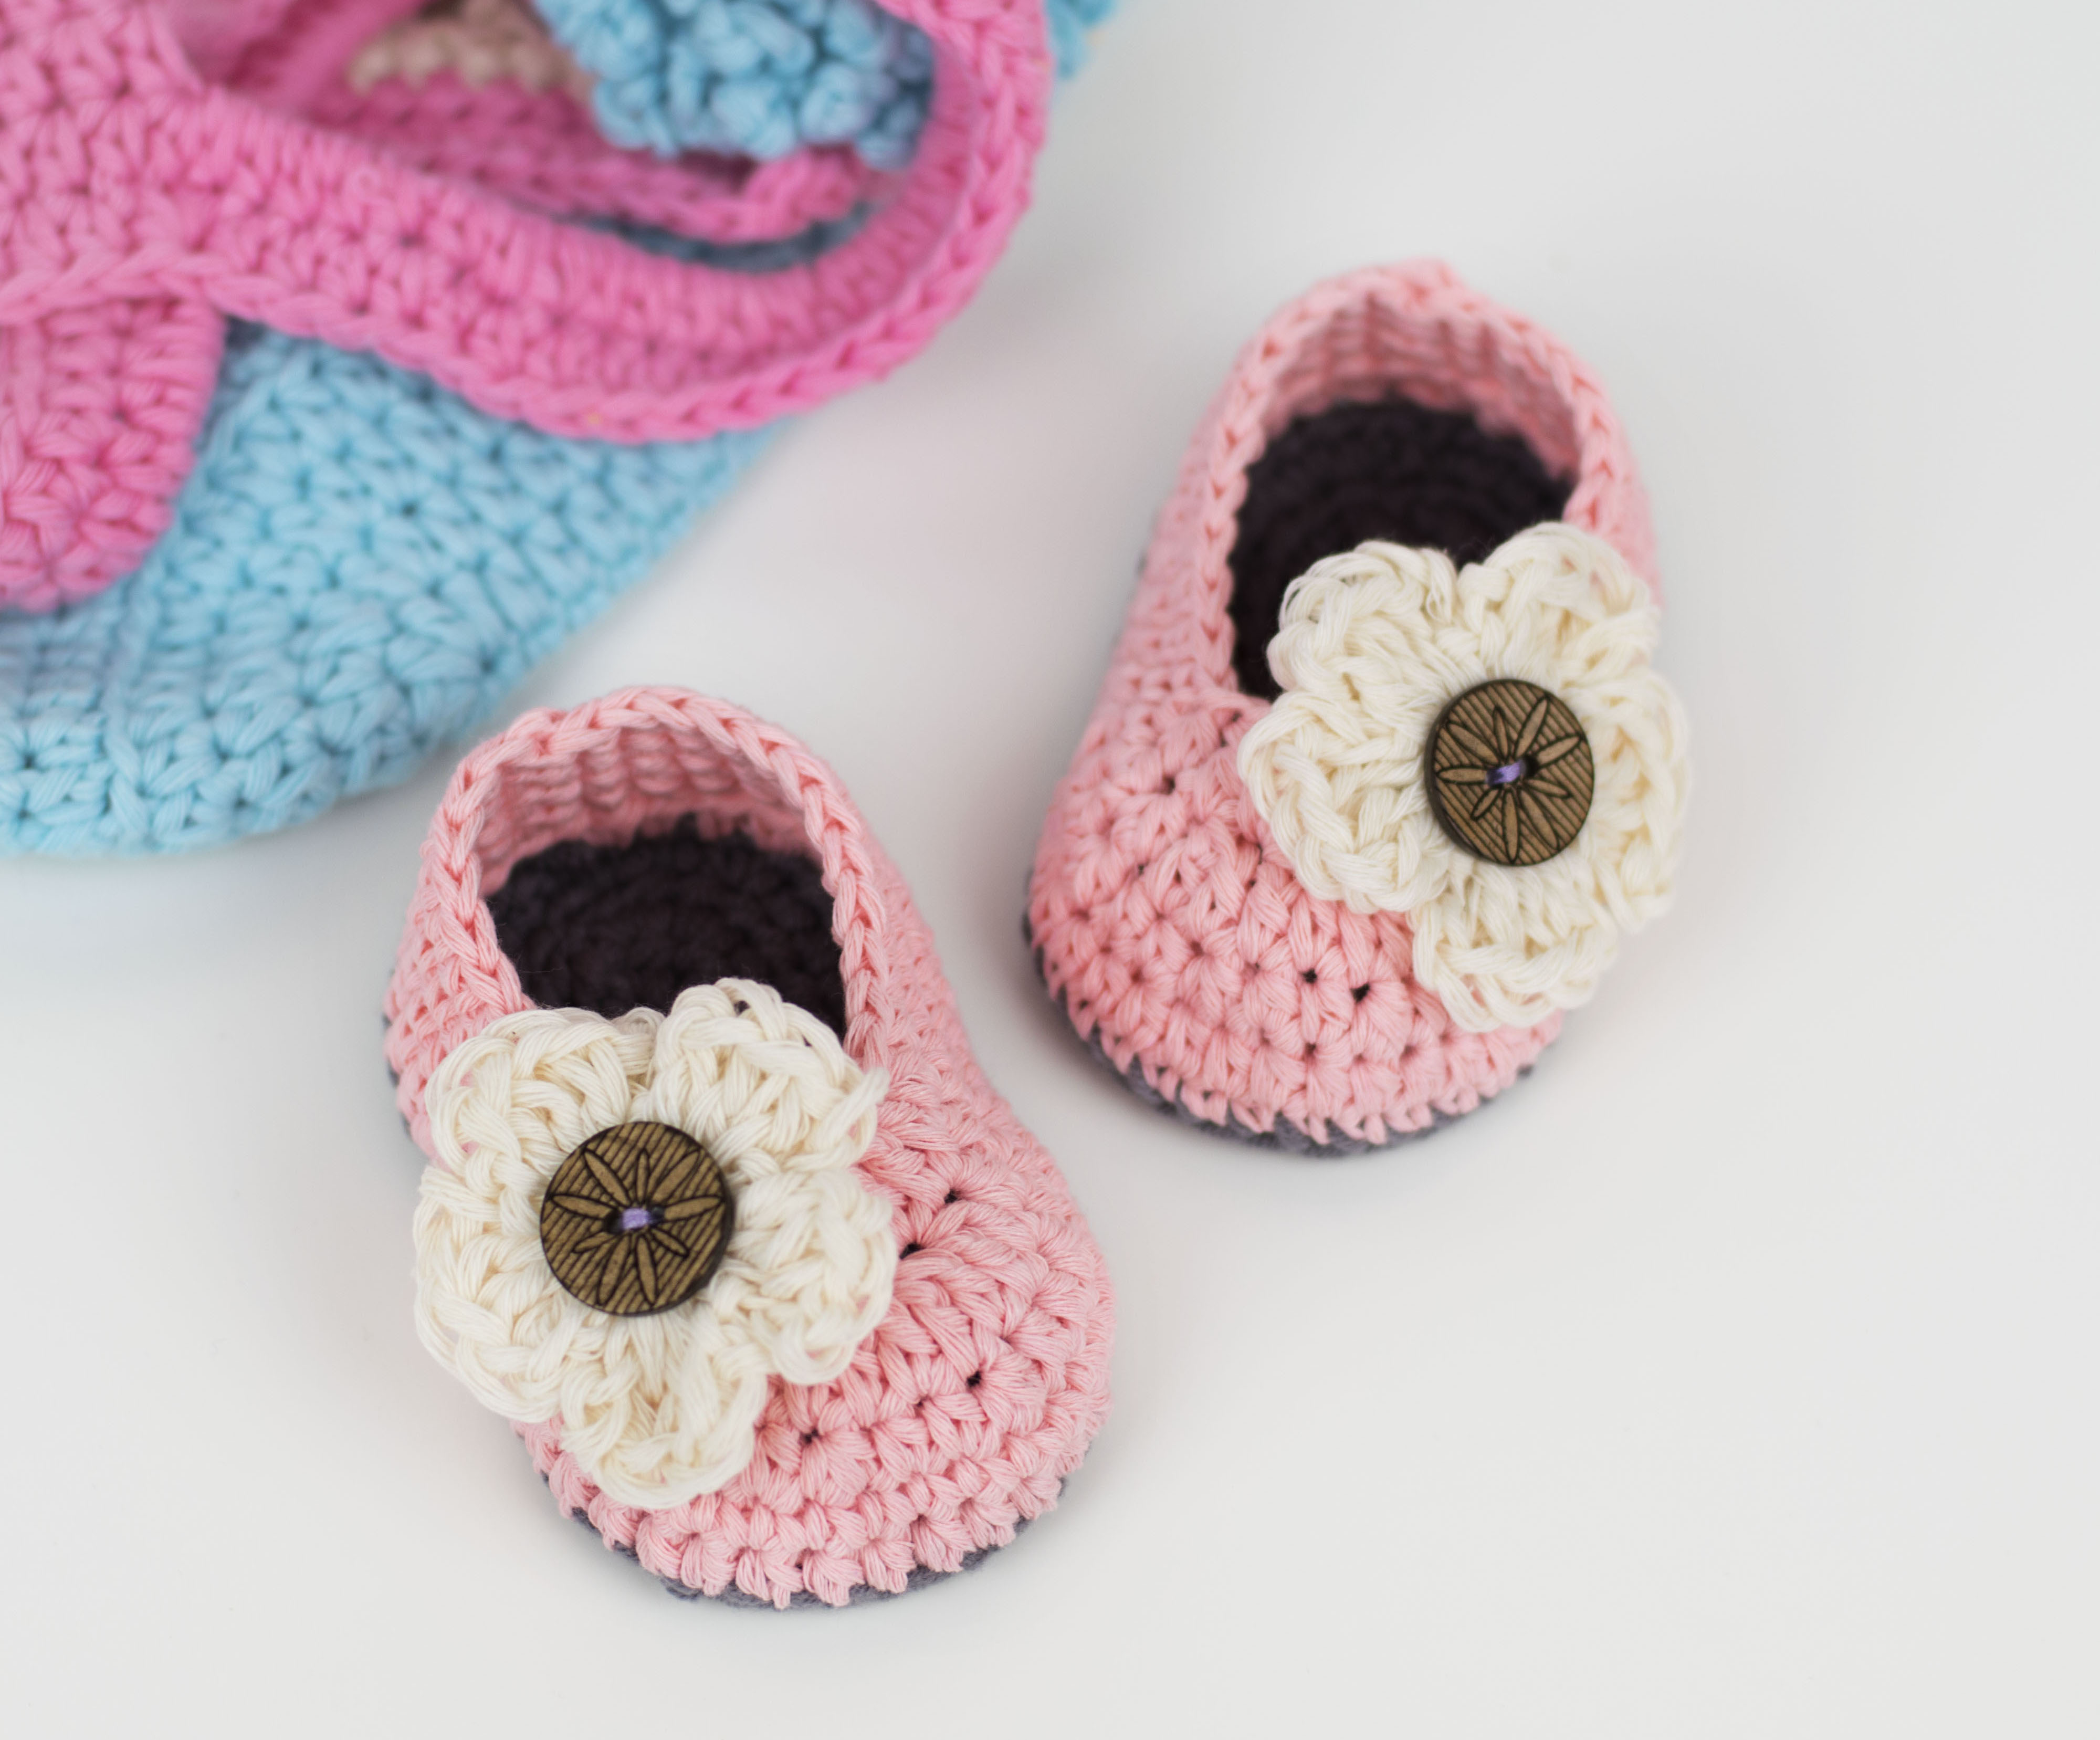 FREE PATTERN: Crochet Baby Booties With Flower – Croby Patterns